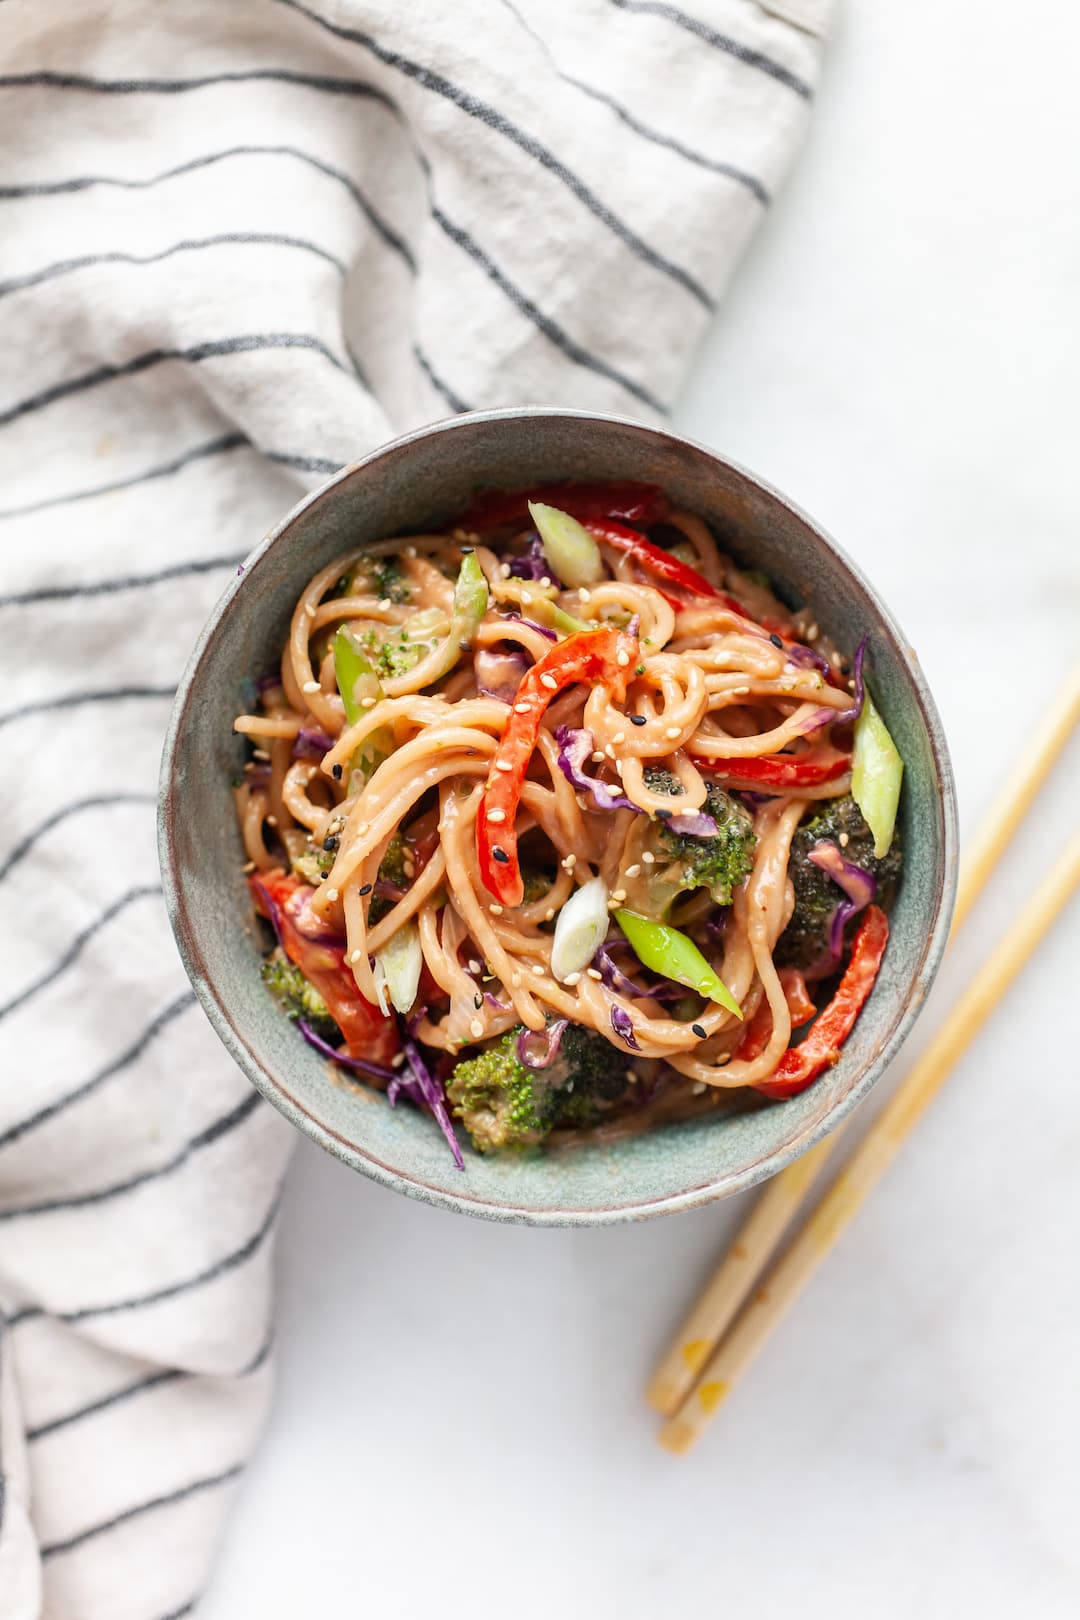 Delicious and healthy bowl of peanut sauce noodles and vegetables 